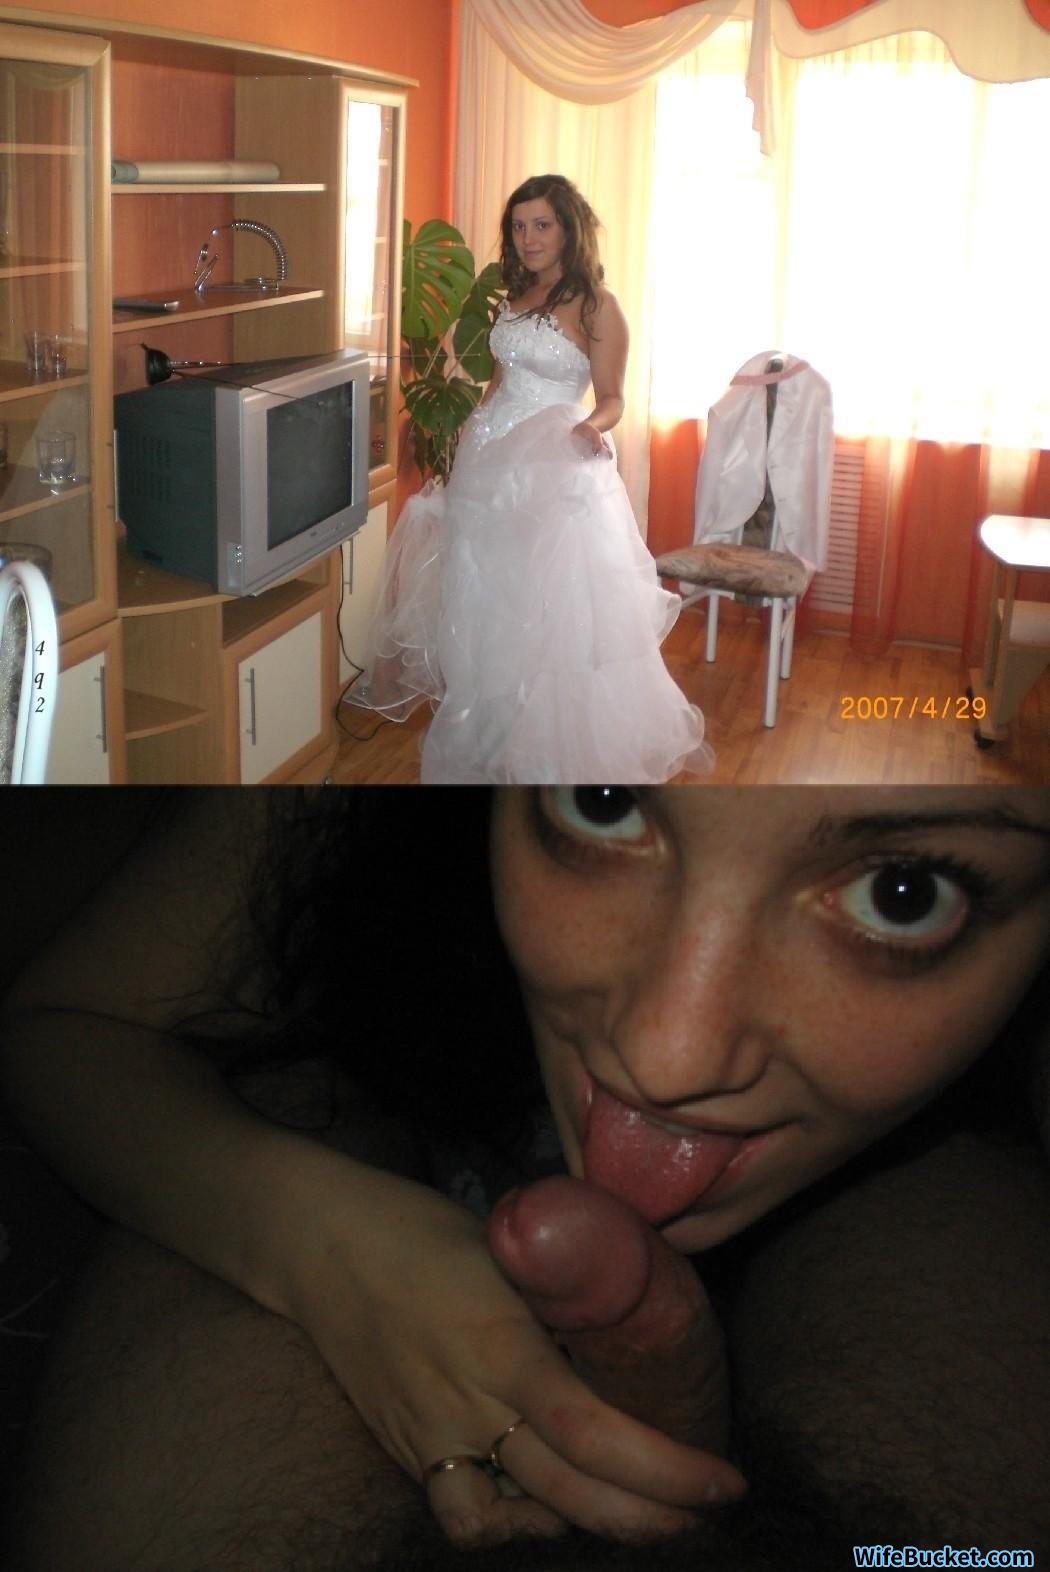 GALLERY Before-after nudes of real brides!